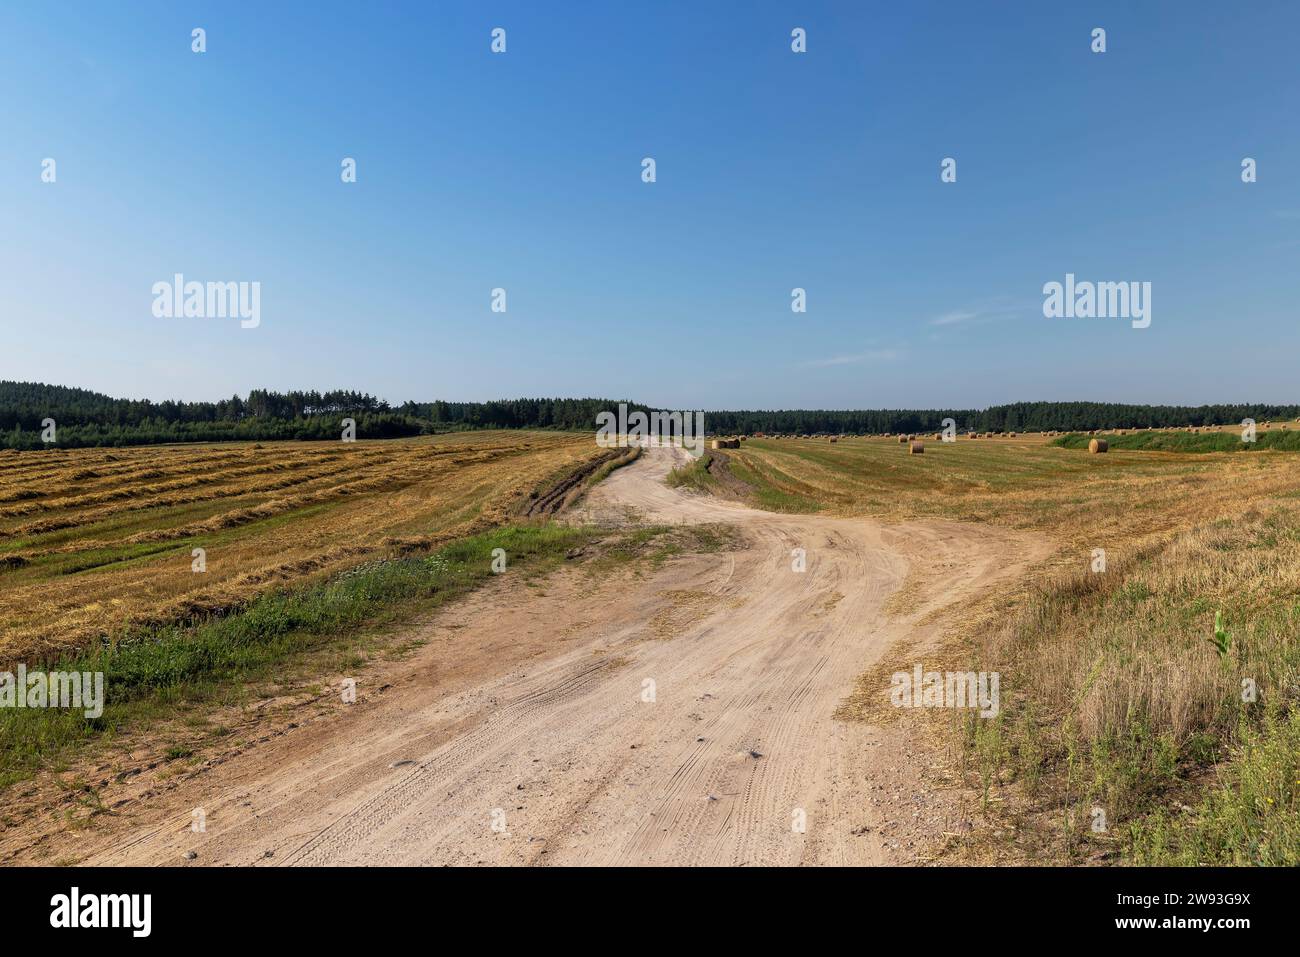 Rural road for cars and transport, ruts and traces of cars on a sandy road in rural areas Stock Photo